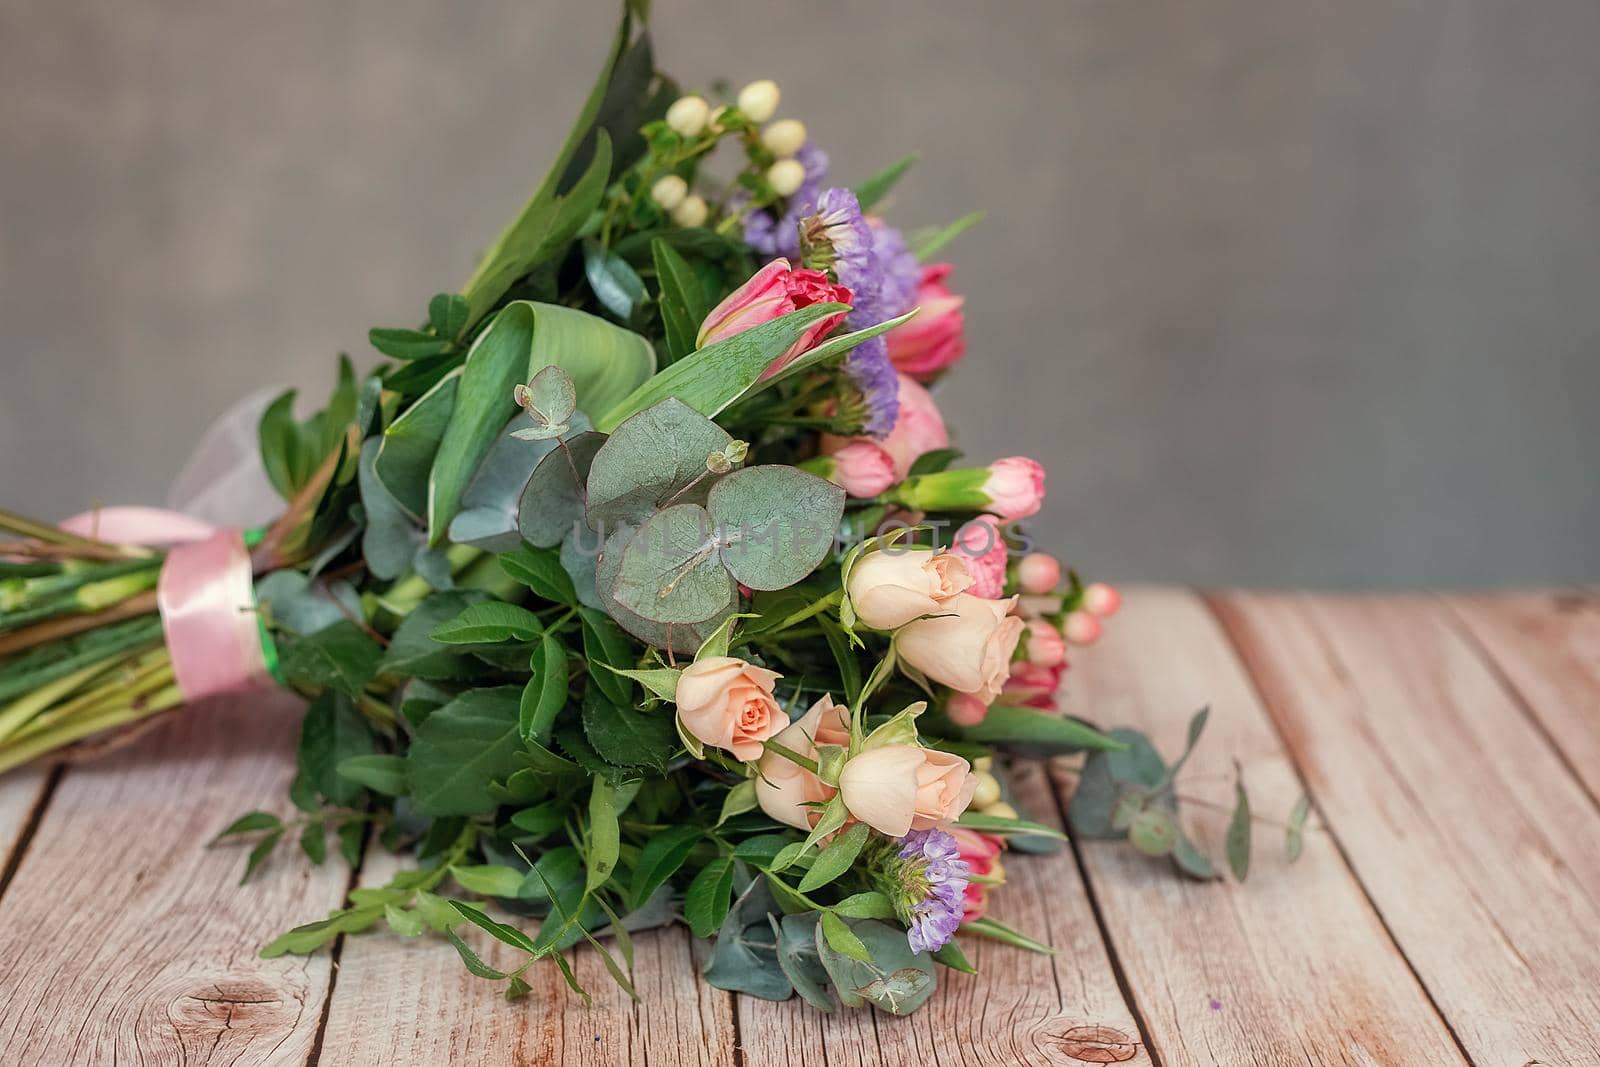 Close up view of a beautiful bouquet of mixed coloful flowers on wooden table. The concept of a flower shop and flower delivery as a family business, florist work.